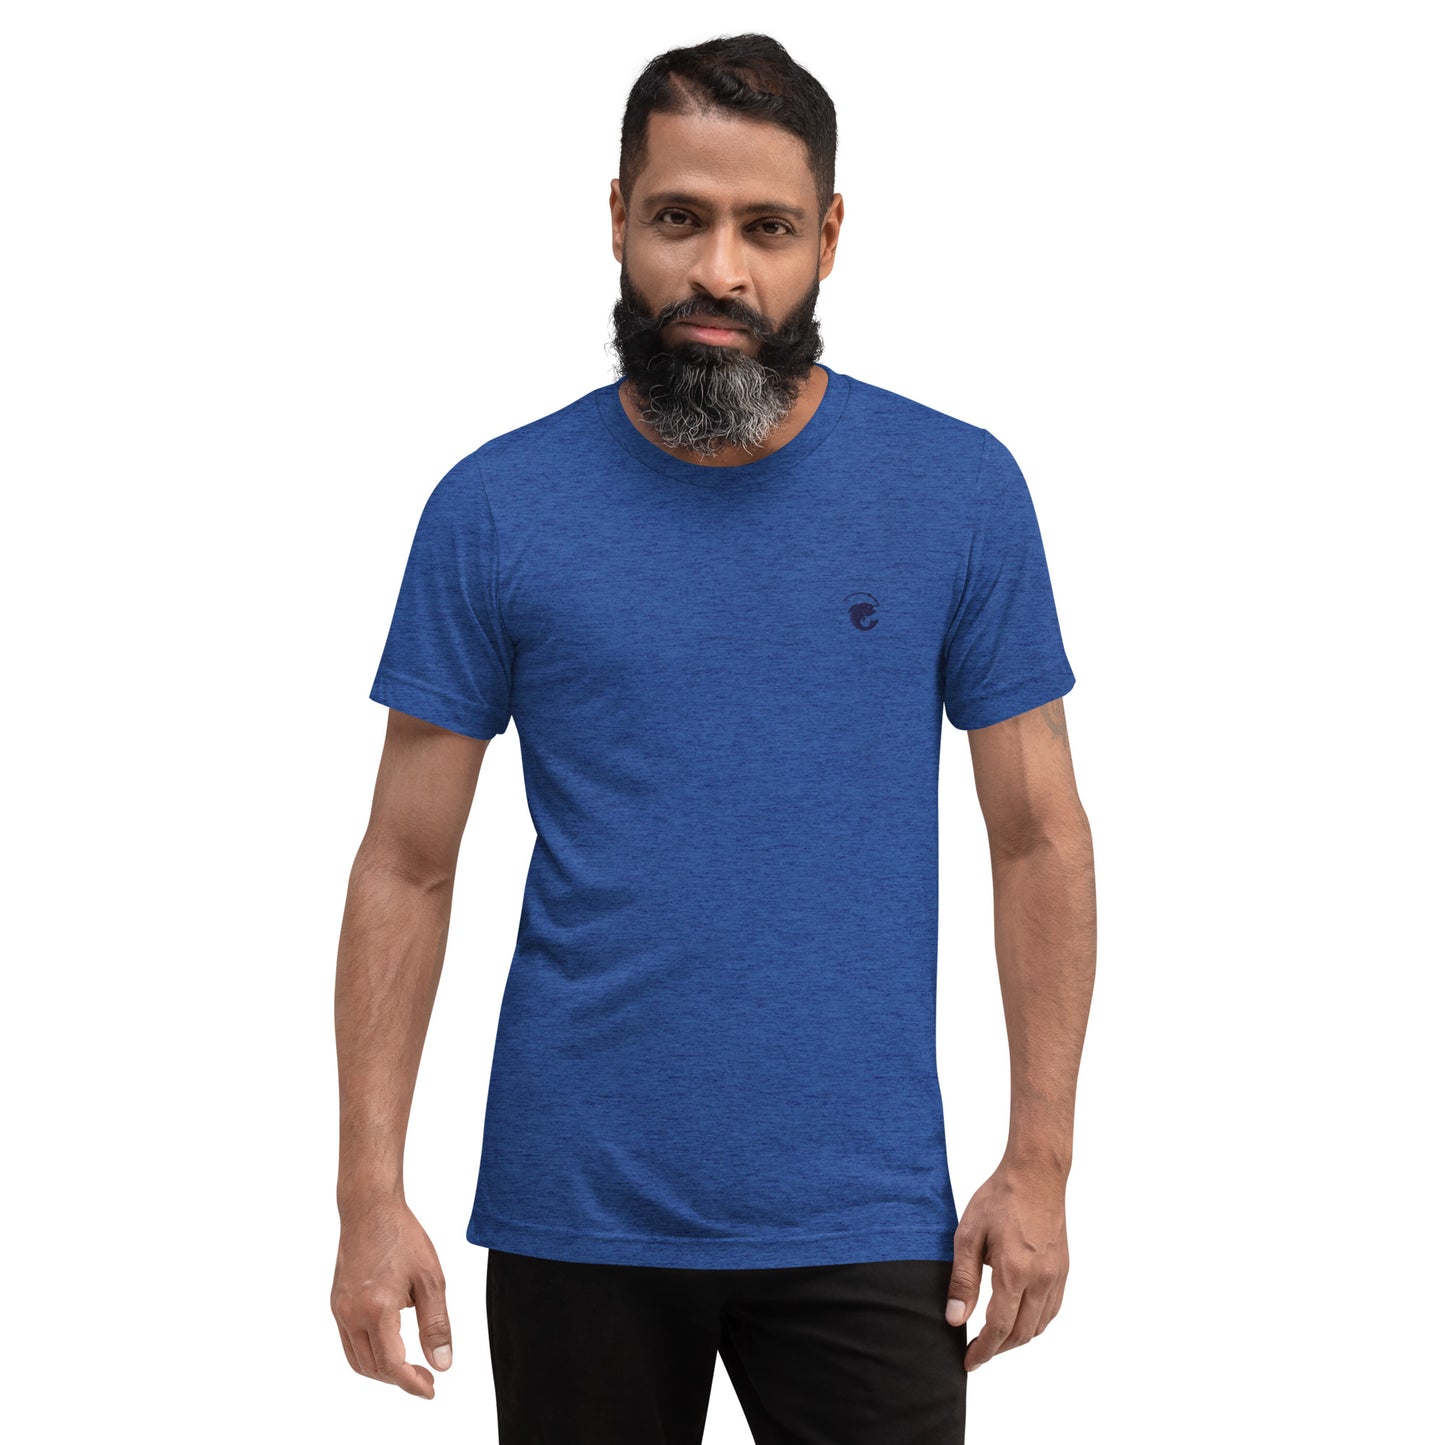 Fitted Durable Vintage T-Shirt - Navy